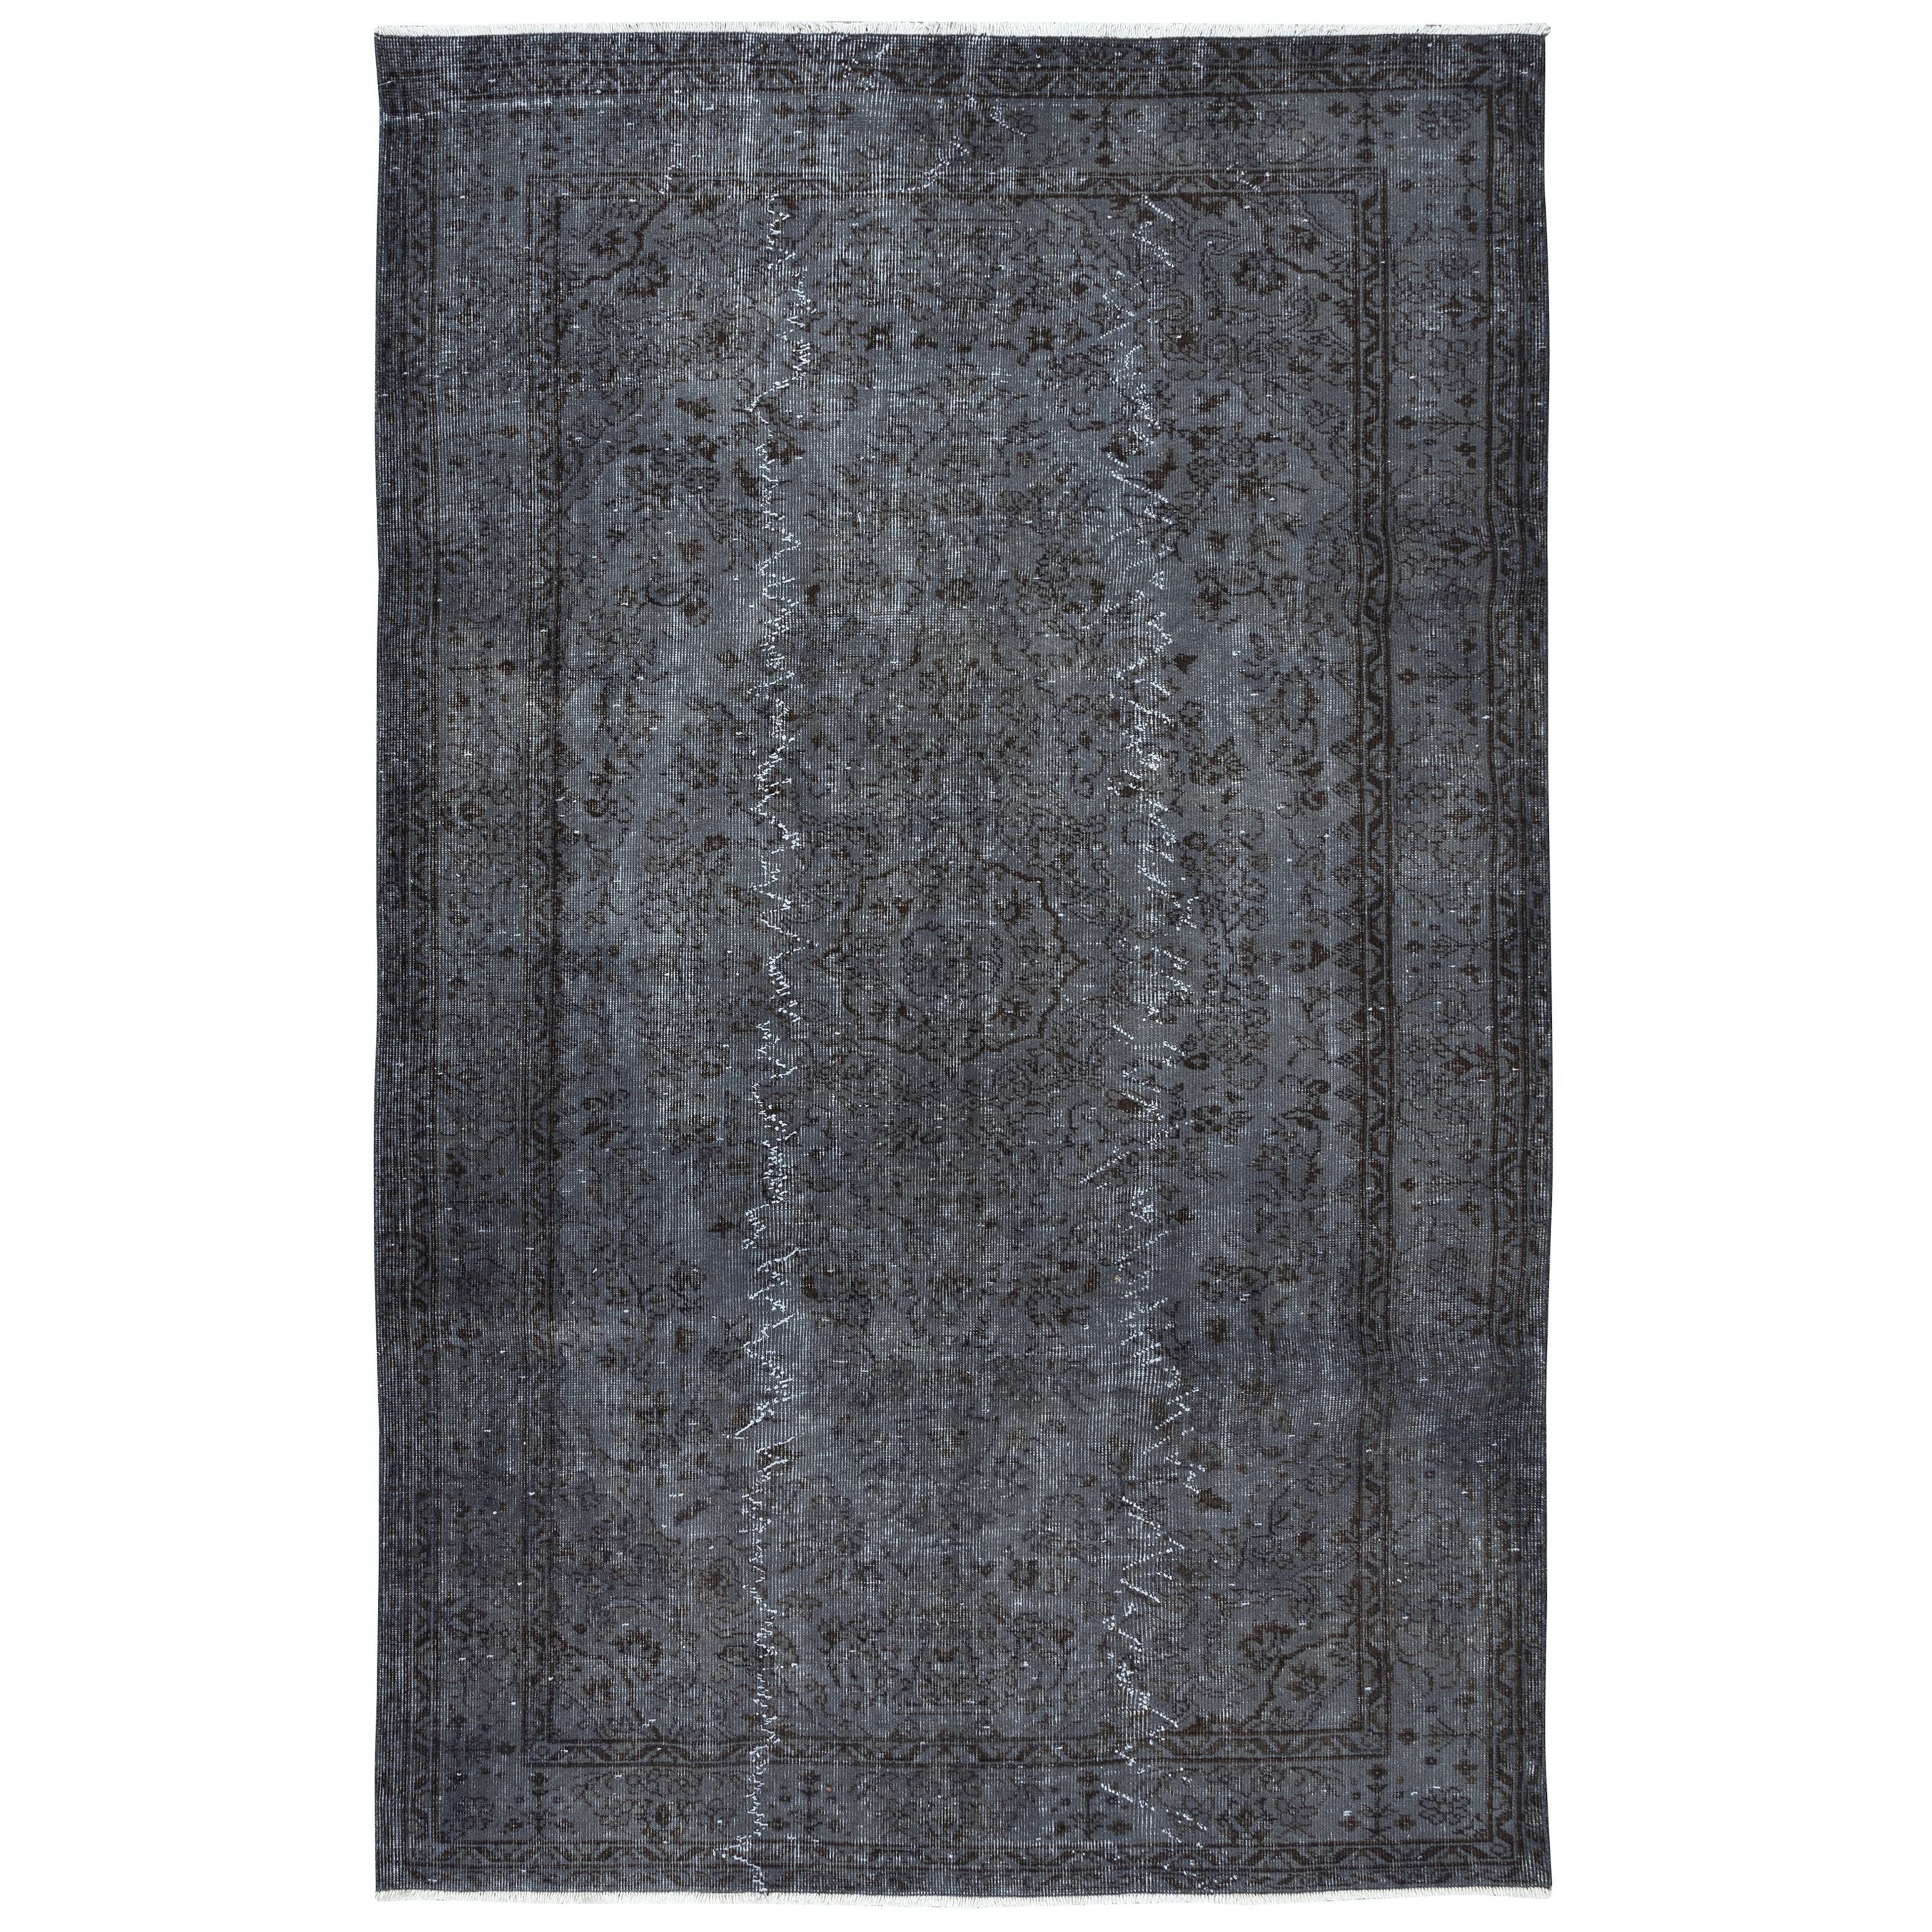 6x9.3 Ft Iron Gray Modern Area Rug, Room Size Redyed Handmade Living Room Carpet For Sale